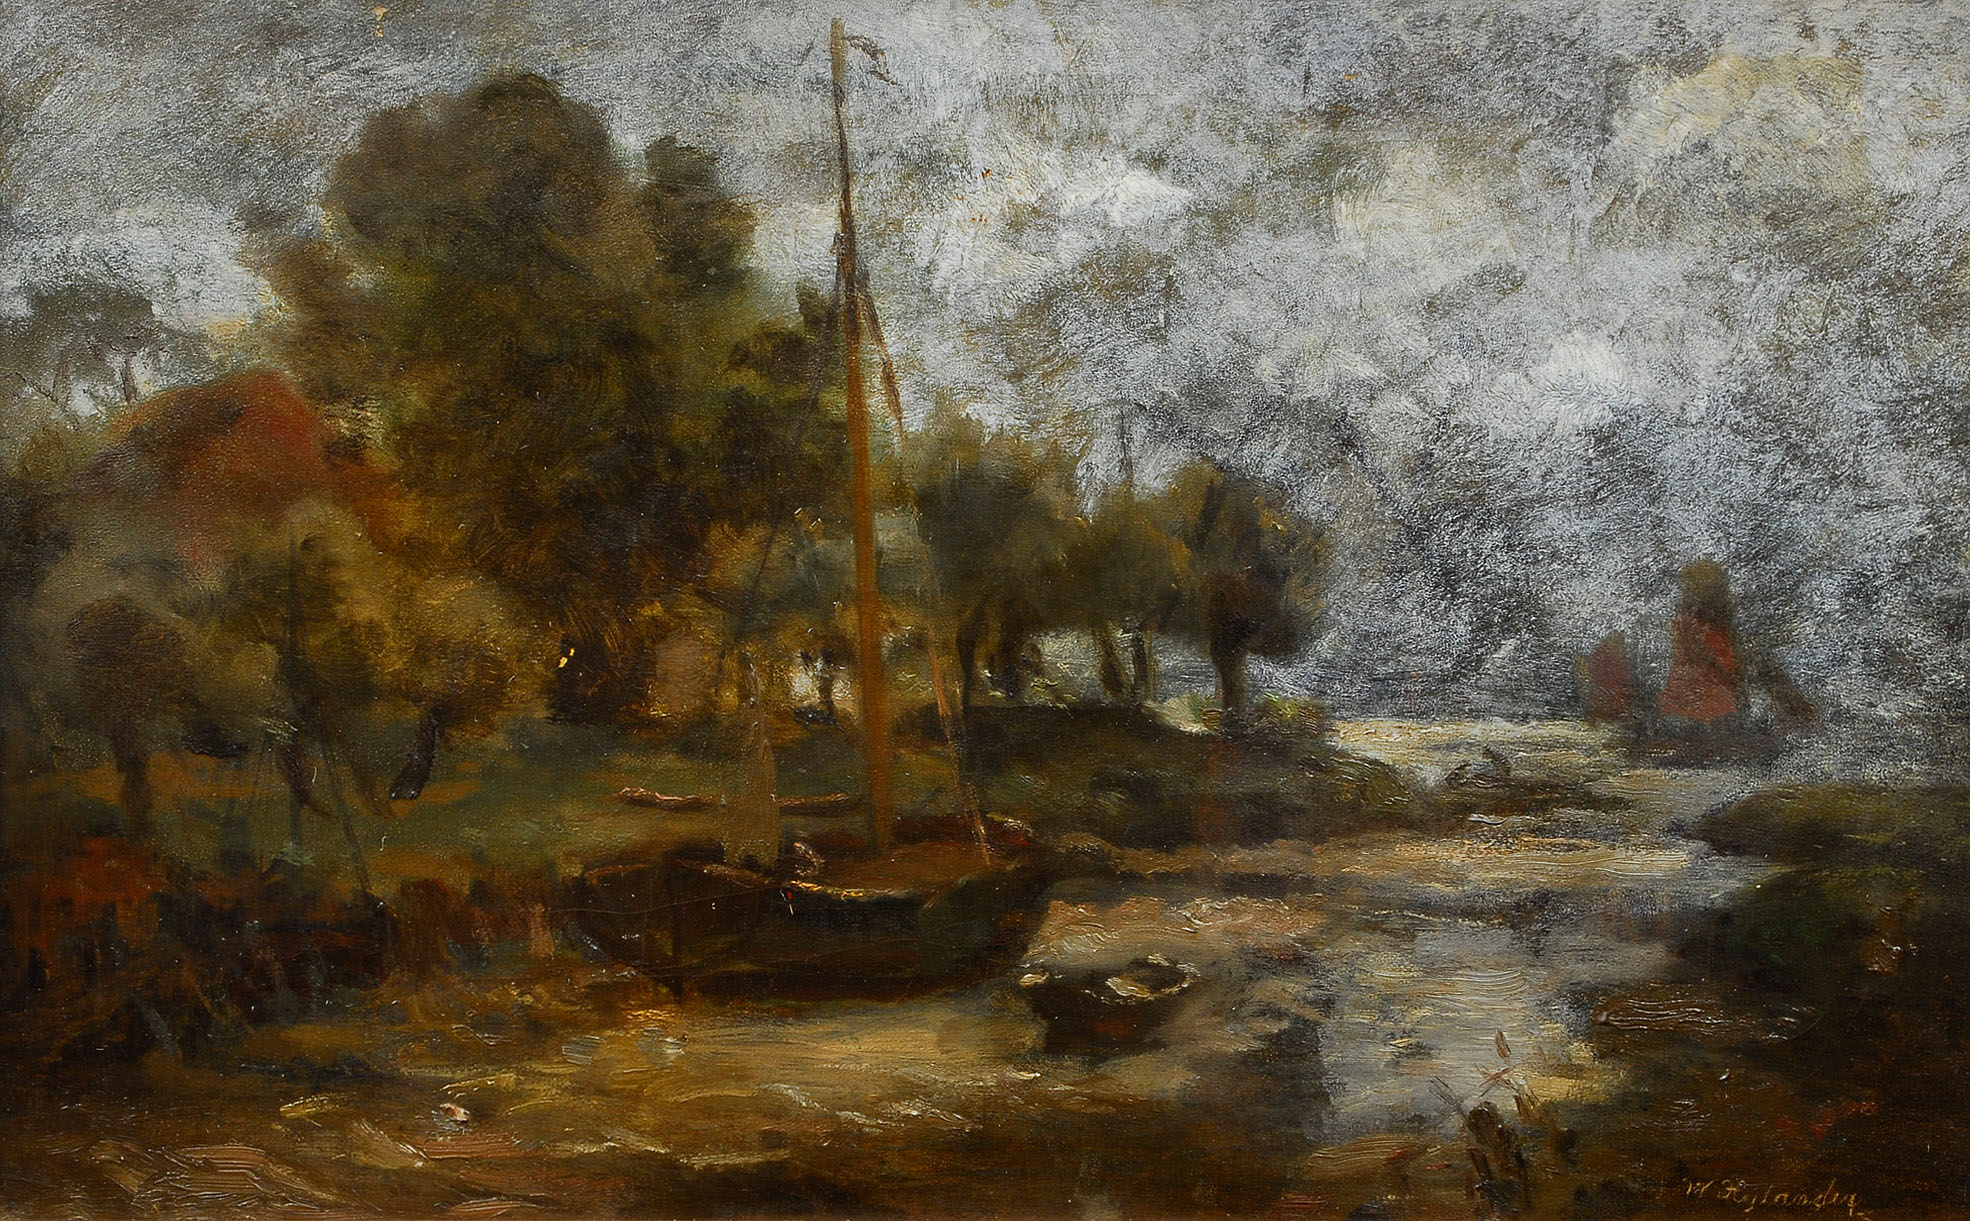 Cutter in a creek of the river Elbe